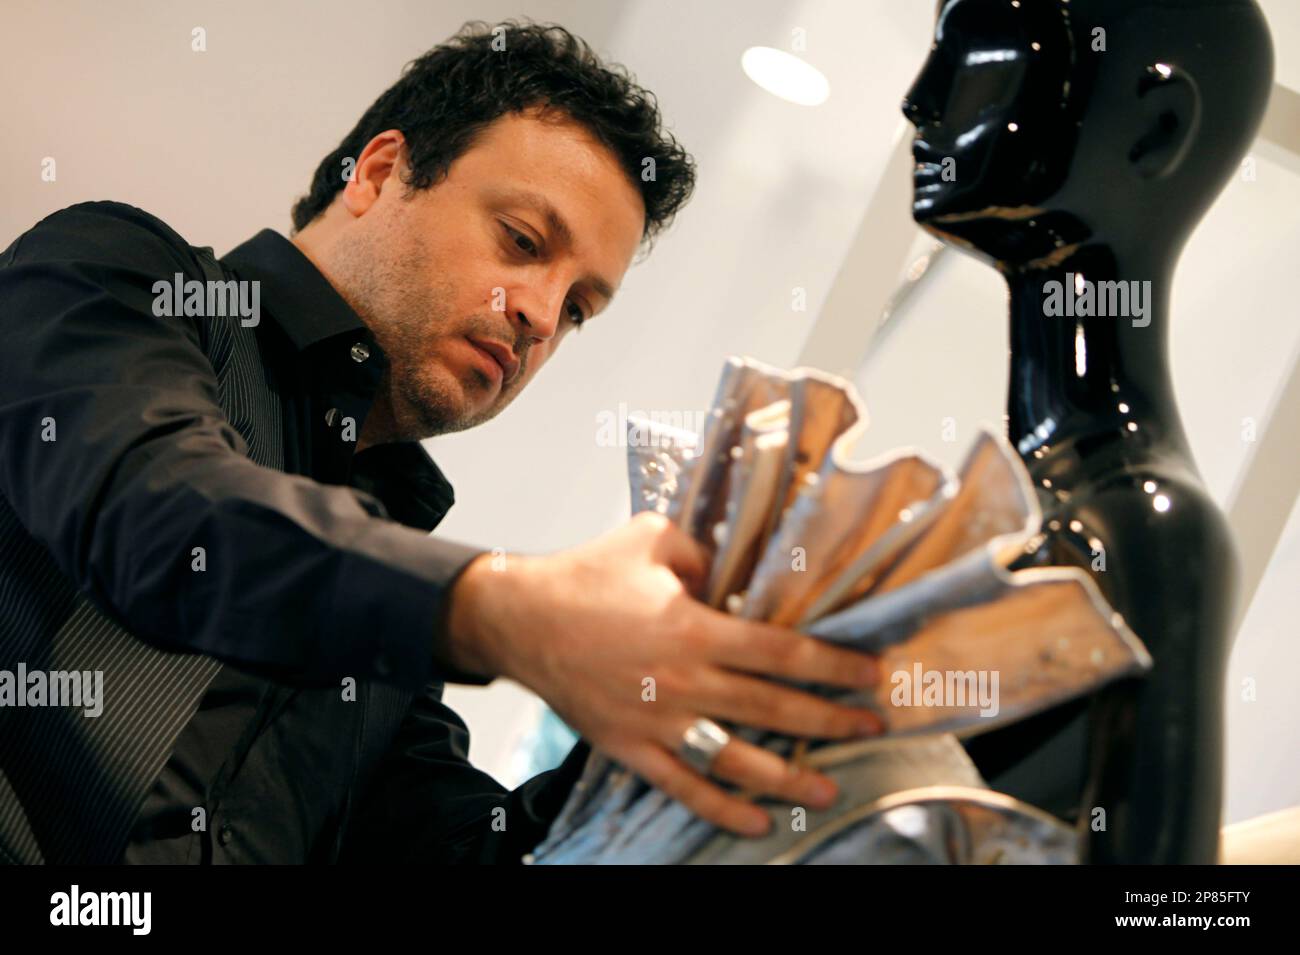 FILE - In this April 28, 2009 file photo, Lebanese fashion designer Zuhair  Murad fixes a dress on a mannequin in his showroom in Beirut, Lebanon. Amid  a largely conservative Muslim Arab